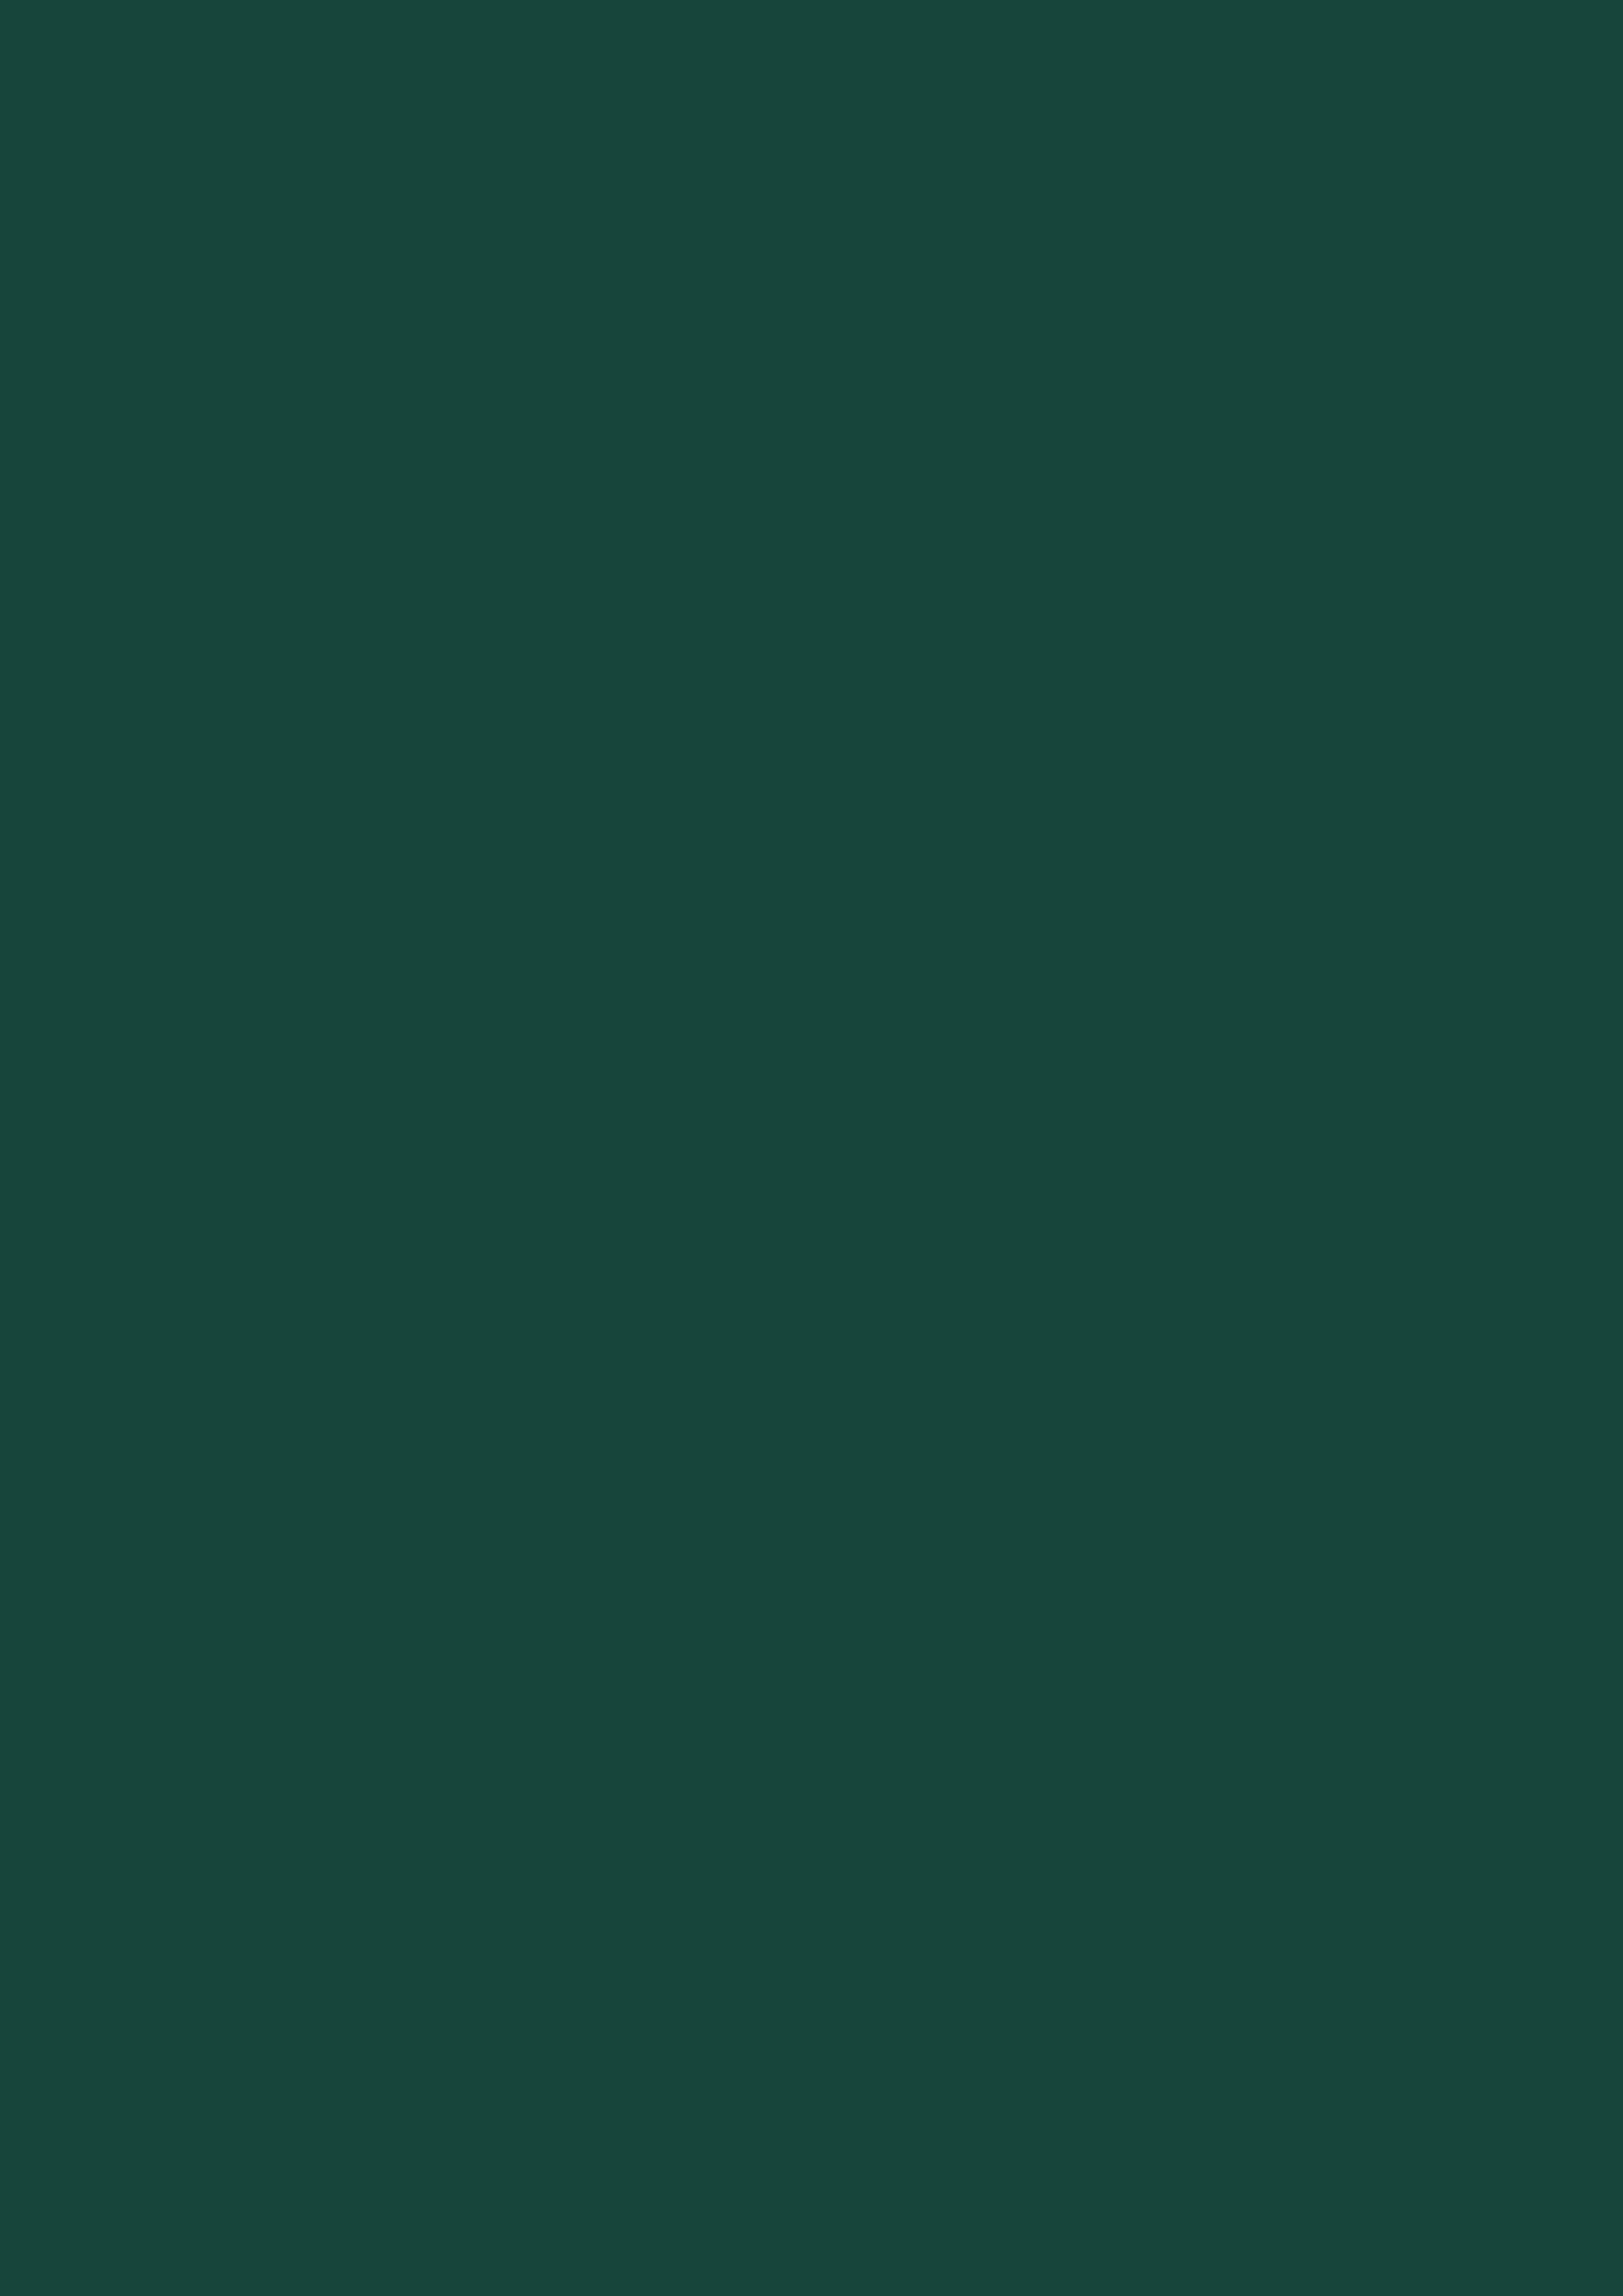 2480x3508 MSU Green Solid Color Background